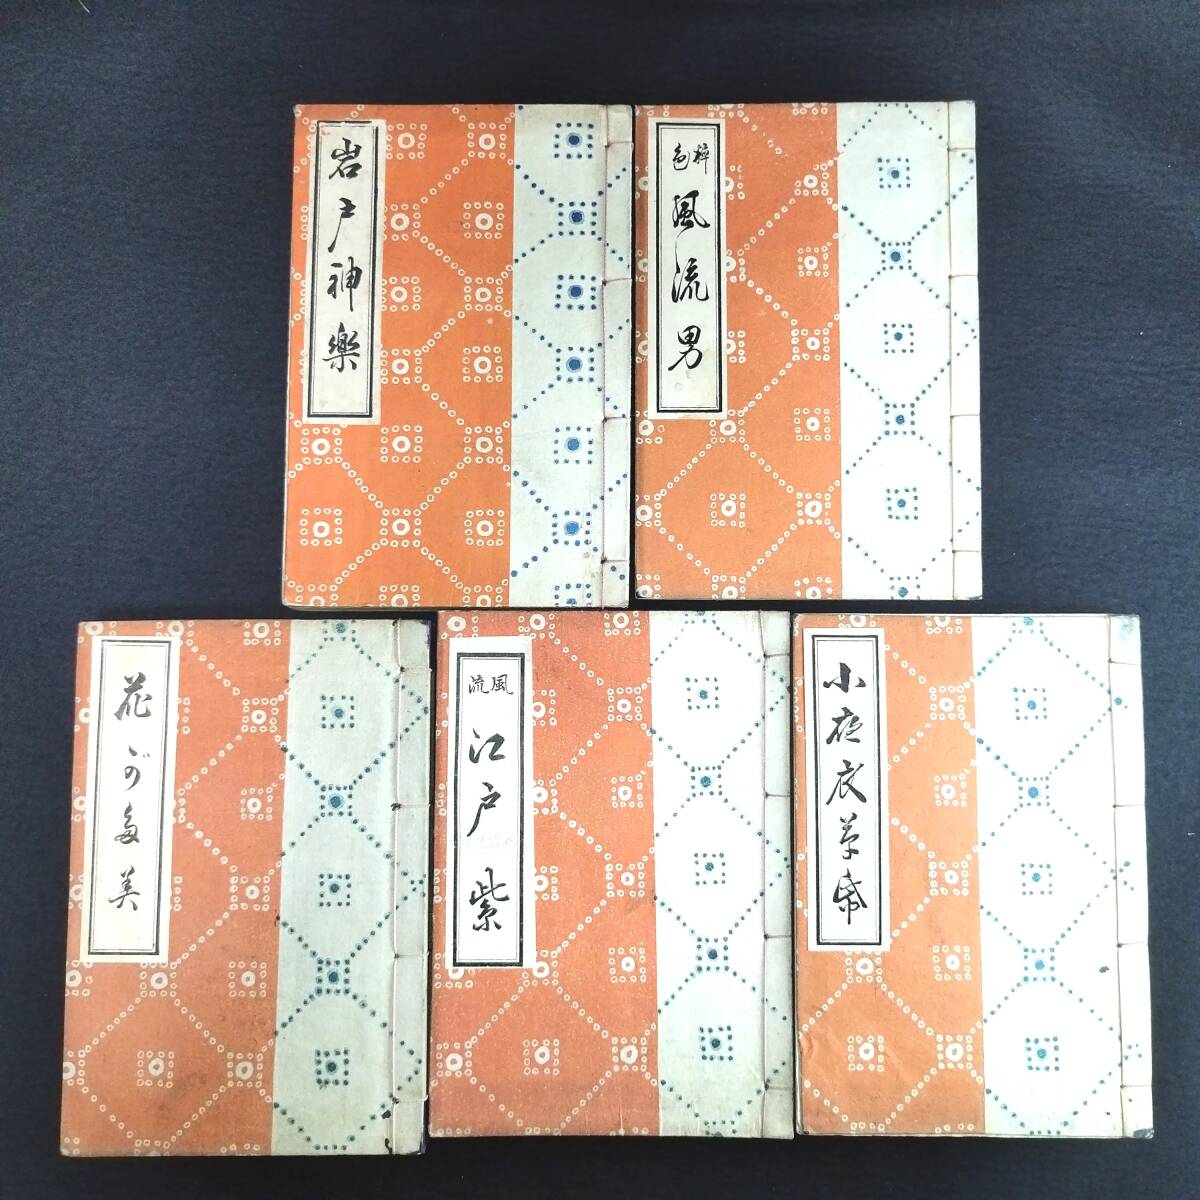 Y058. go in * manner .. paper *5 pcs. ... paper Tokyo tomoe library manners and customs .. materials war front Taisho era thing ukiyoe UKIYOE woodcut antique old fine art old document peace book@ old book 